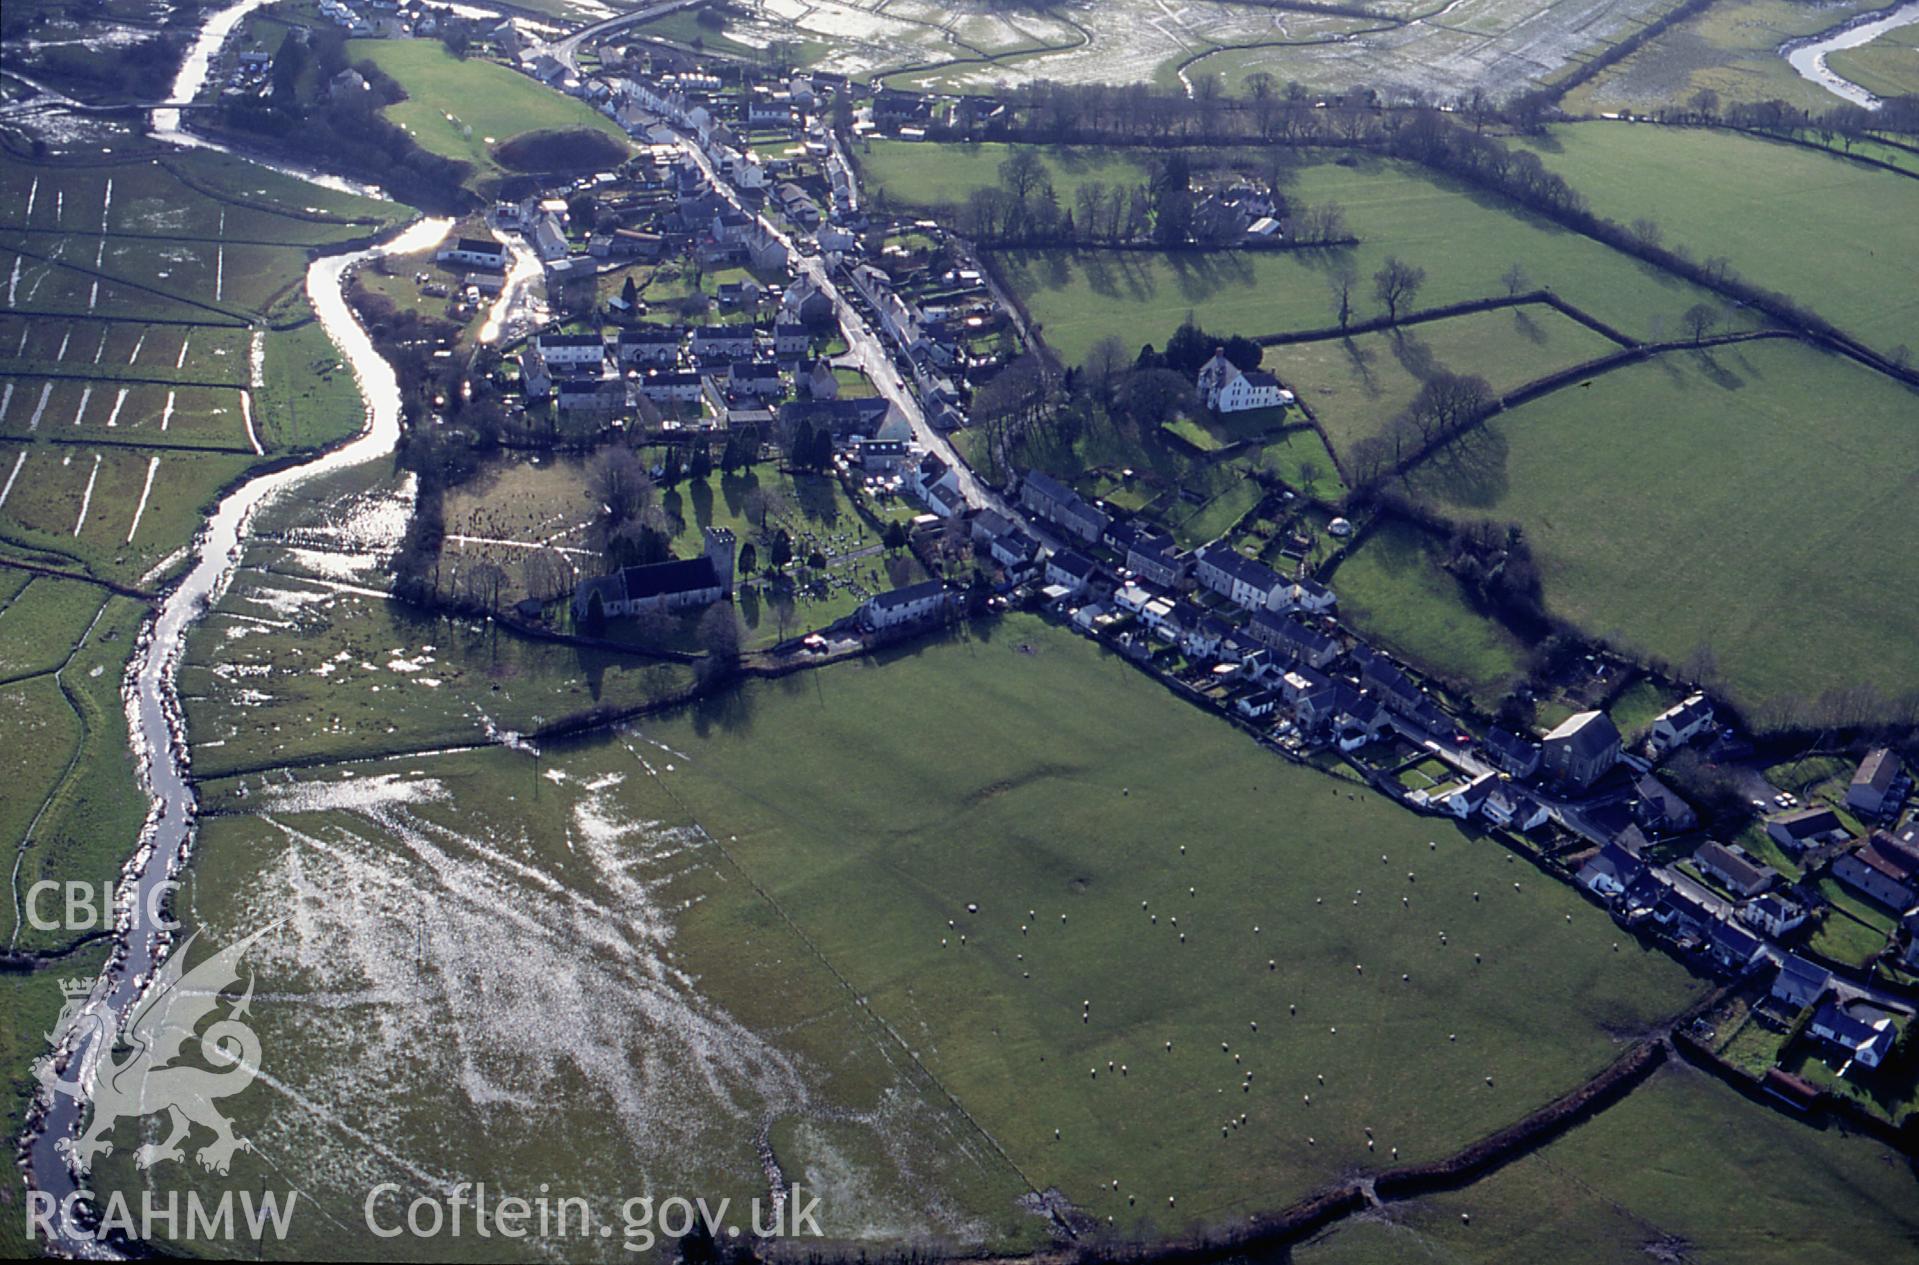 Slide of RCAHMW colour oblique aerial photograph of St Clears;rhydygors, taken by C.R. Musson, 7/2/1997.